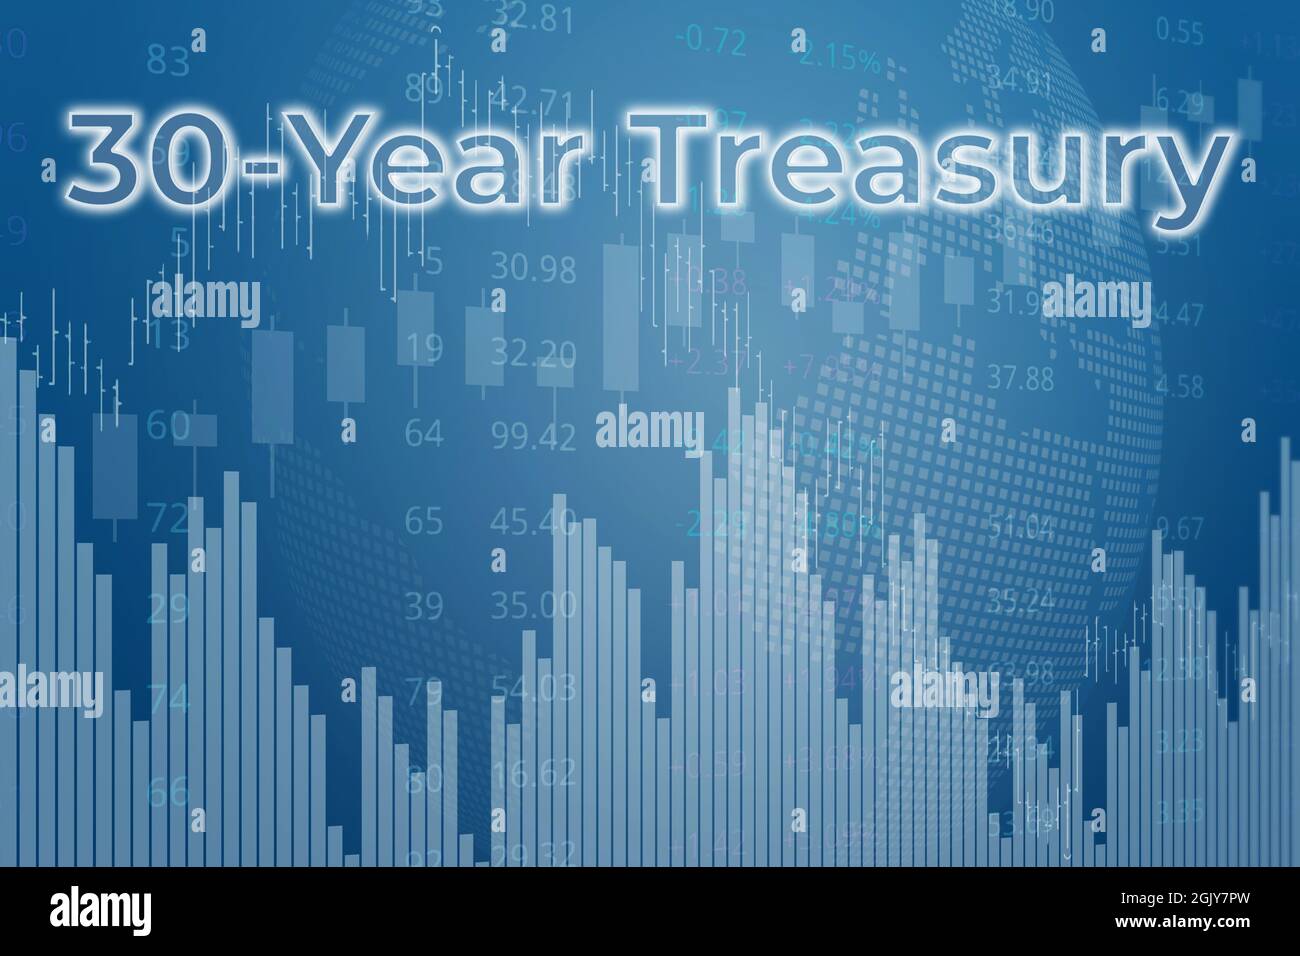 Price change on trading bonds 30-Year Treasury on blue finance background from graphs, charts, columns, pillars, candles, bars, number. Trend Up and D Stock Photo